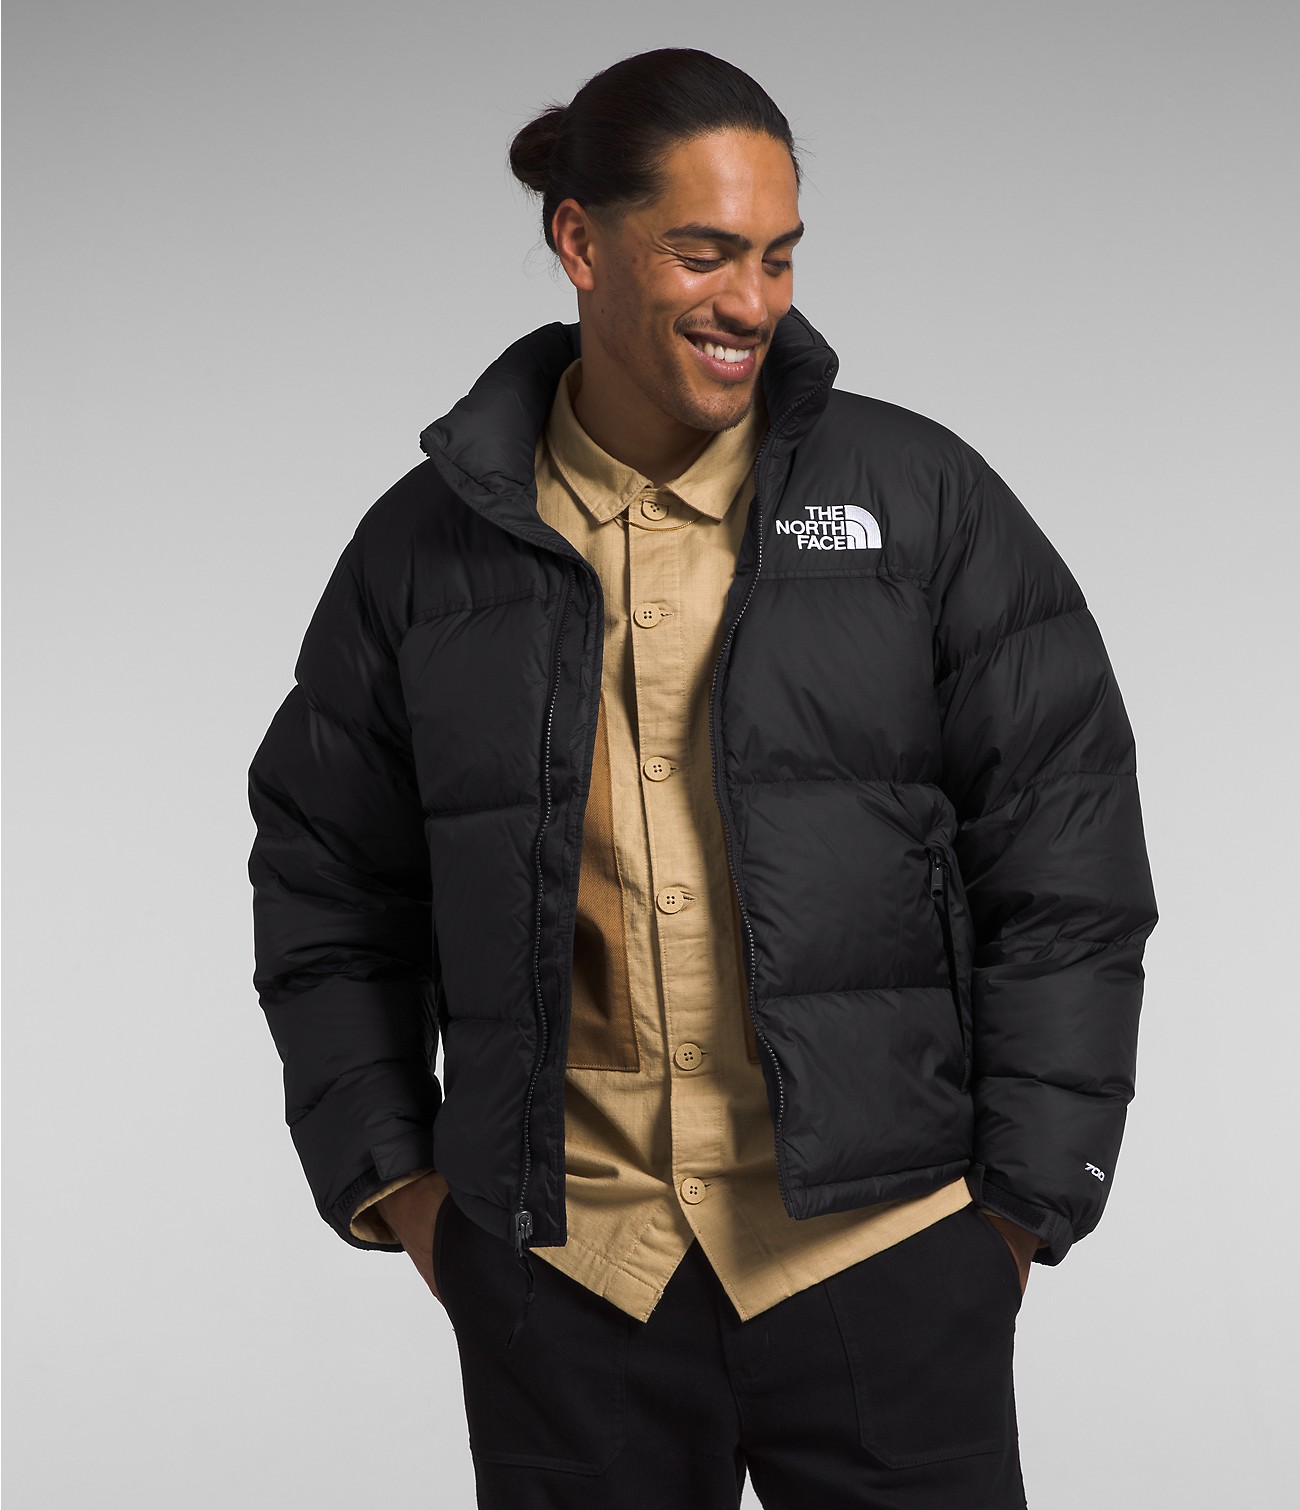 robo tabaco Dictar Men's Summit Series Superior Wind Jacket | The North Face